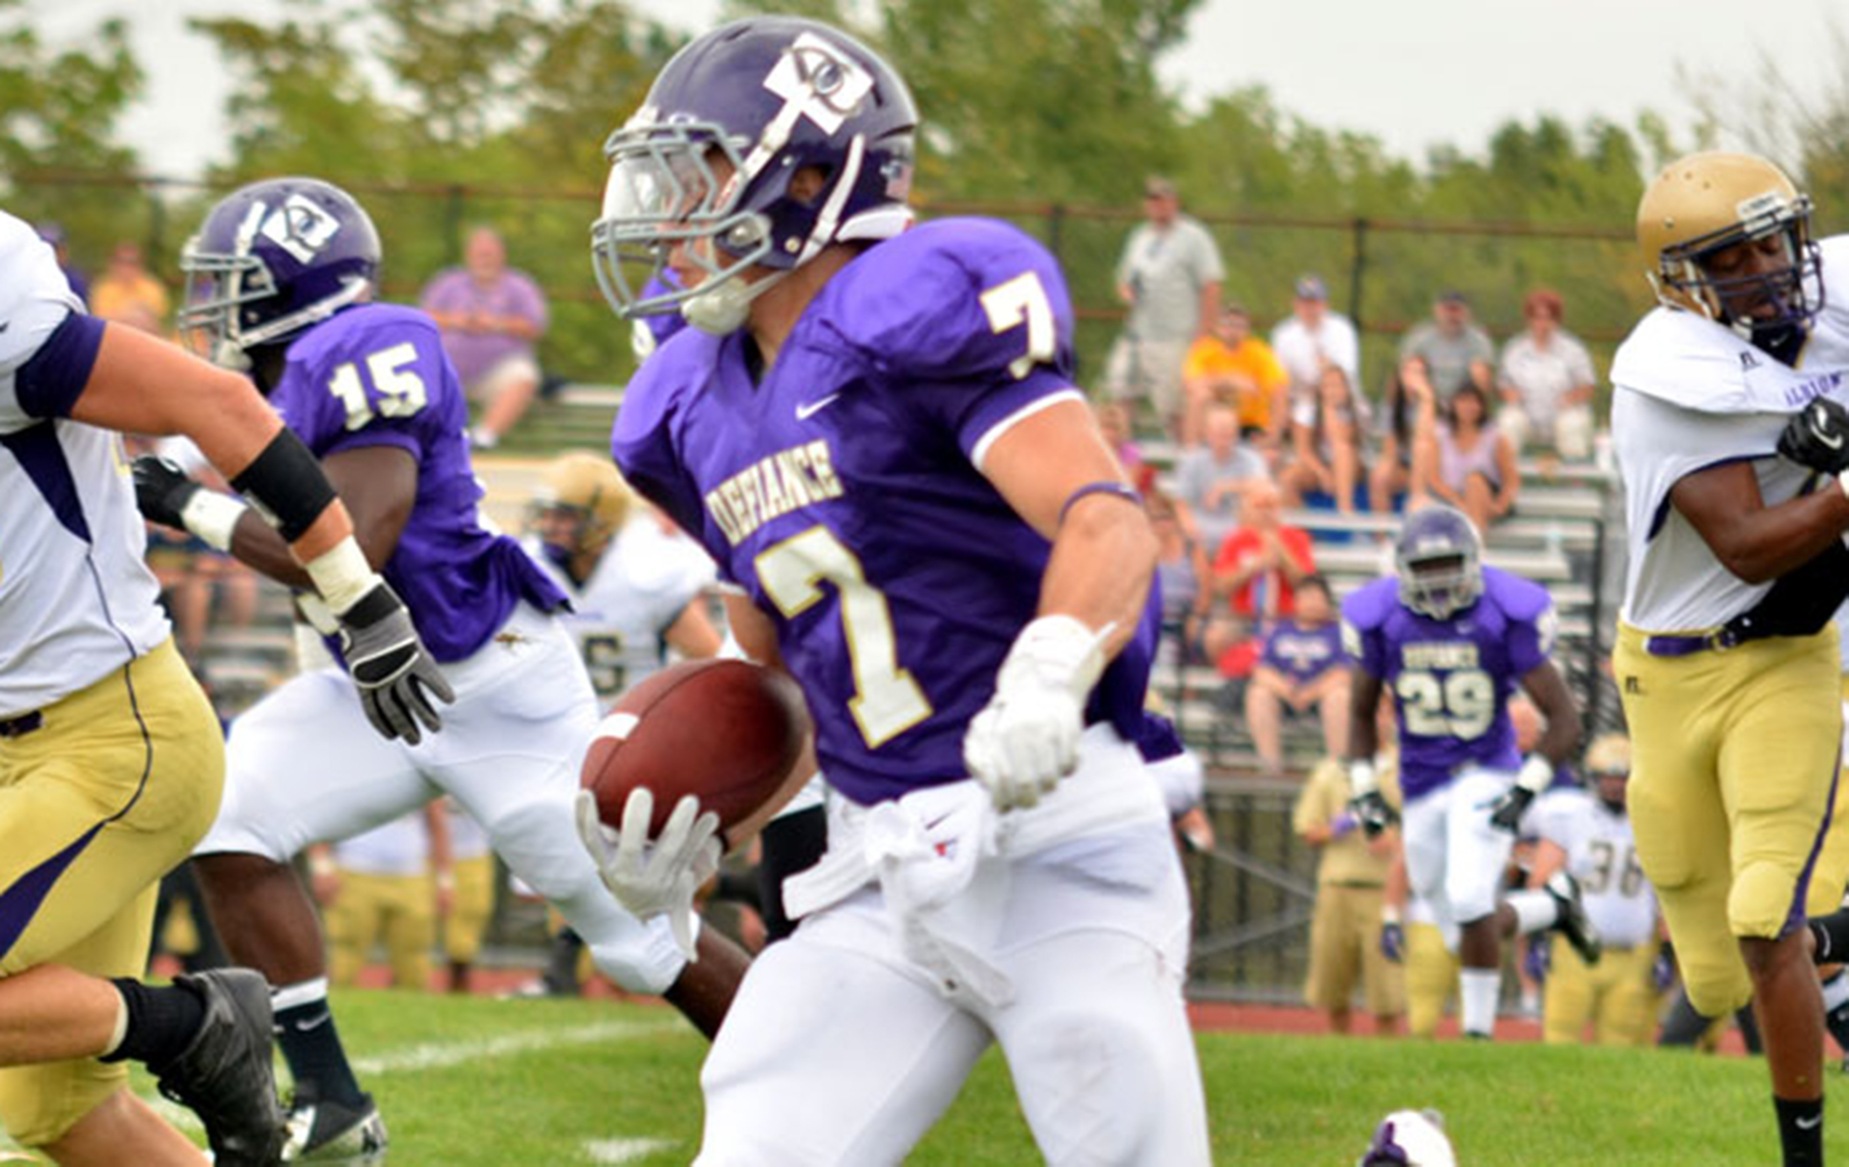 DC's Carrabino Wins Vote for HCAC Top Play Honors